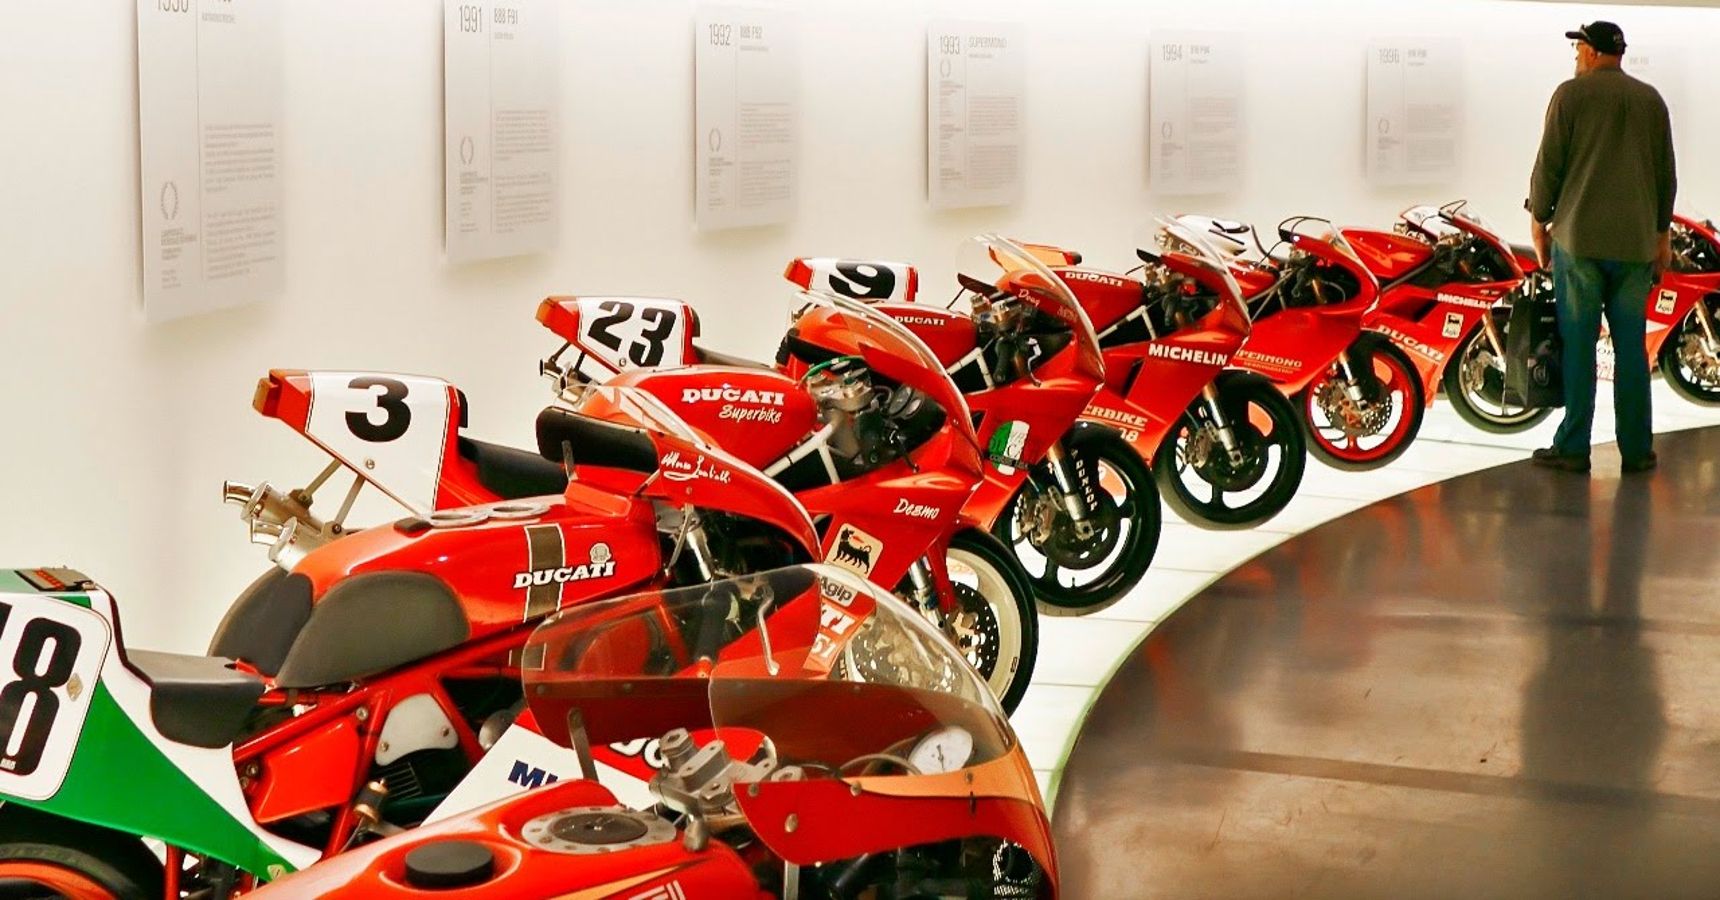 Ducati's Museum features a range of stunning Ducati bikes.